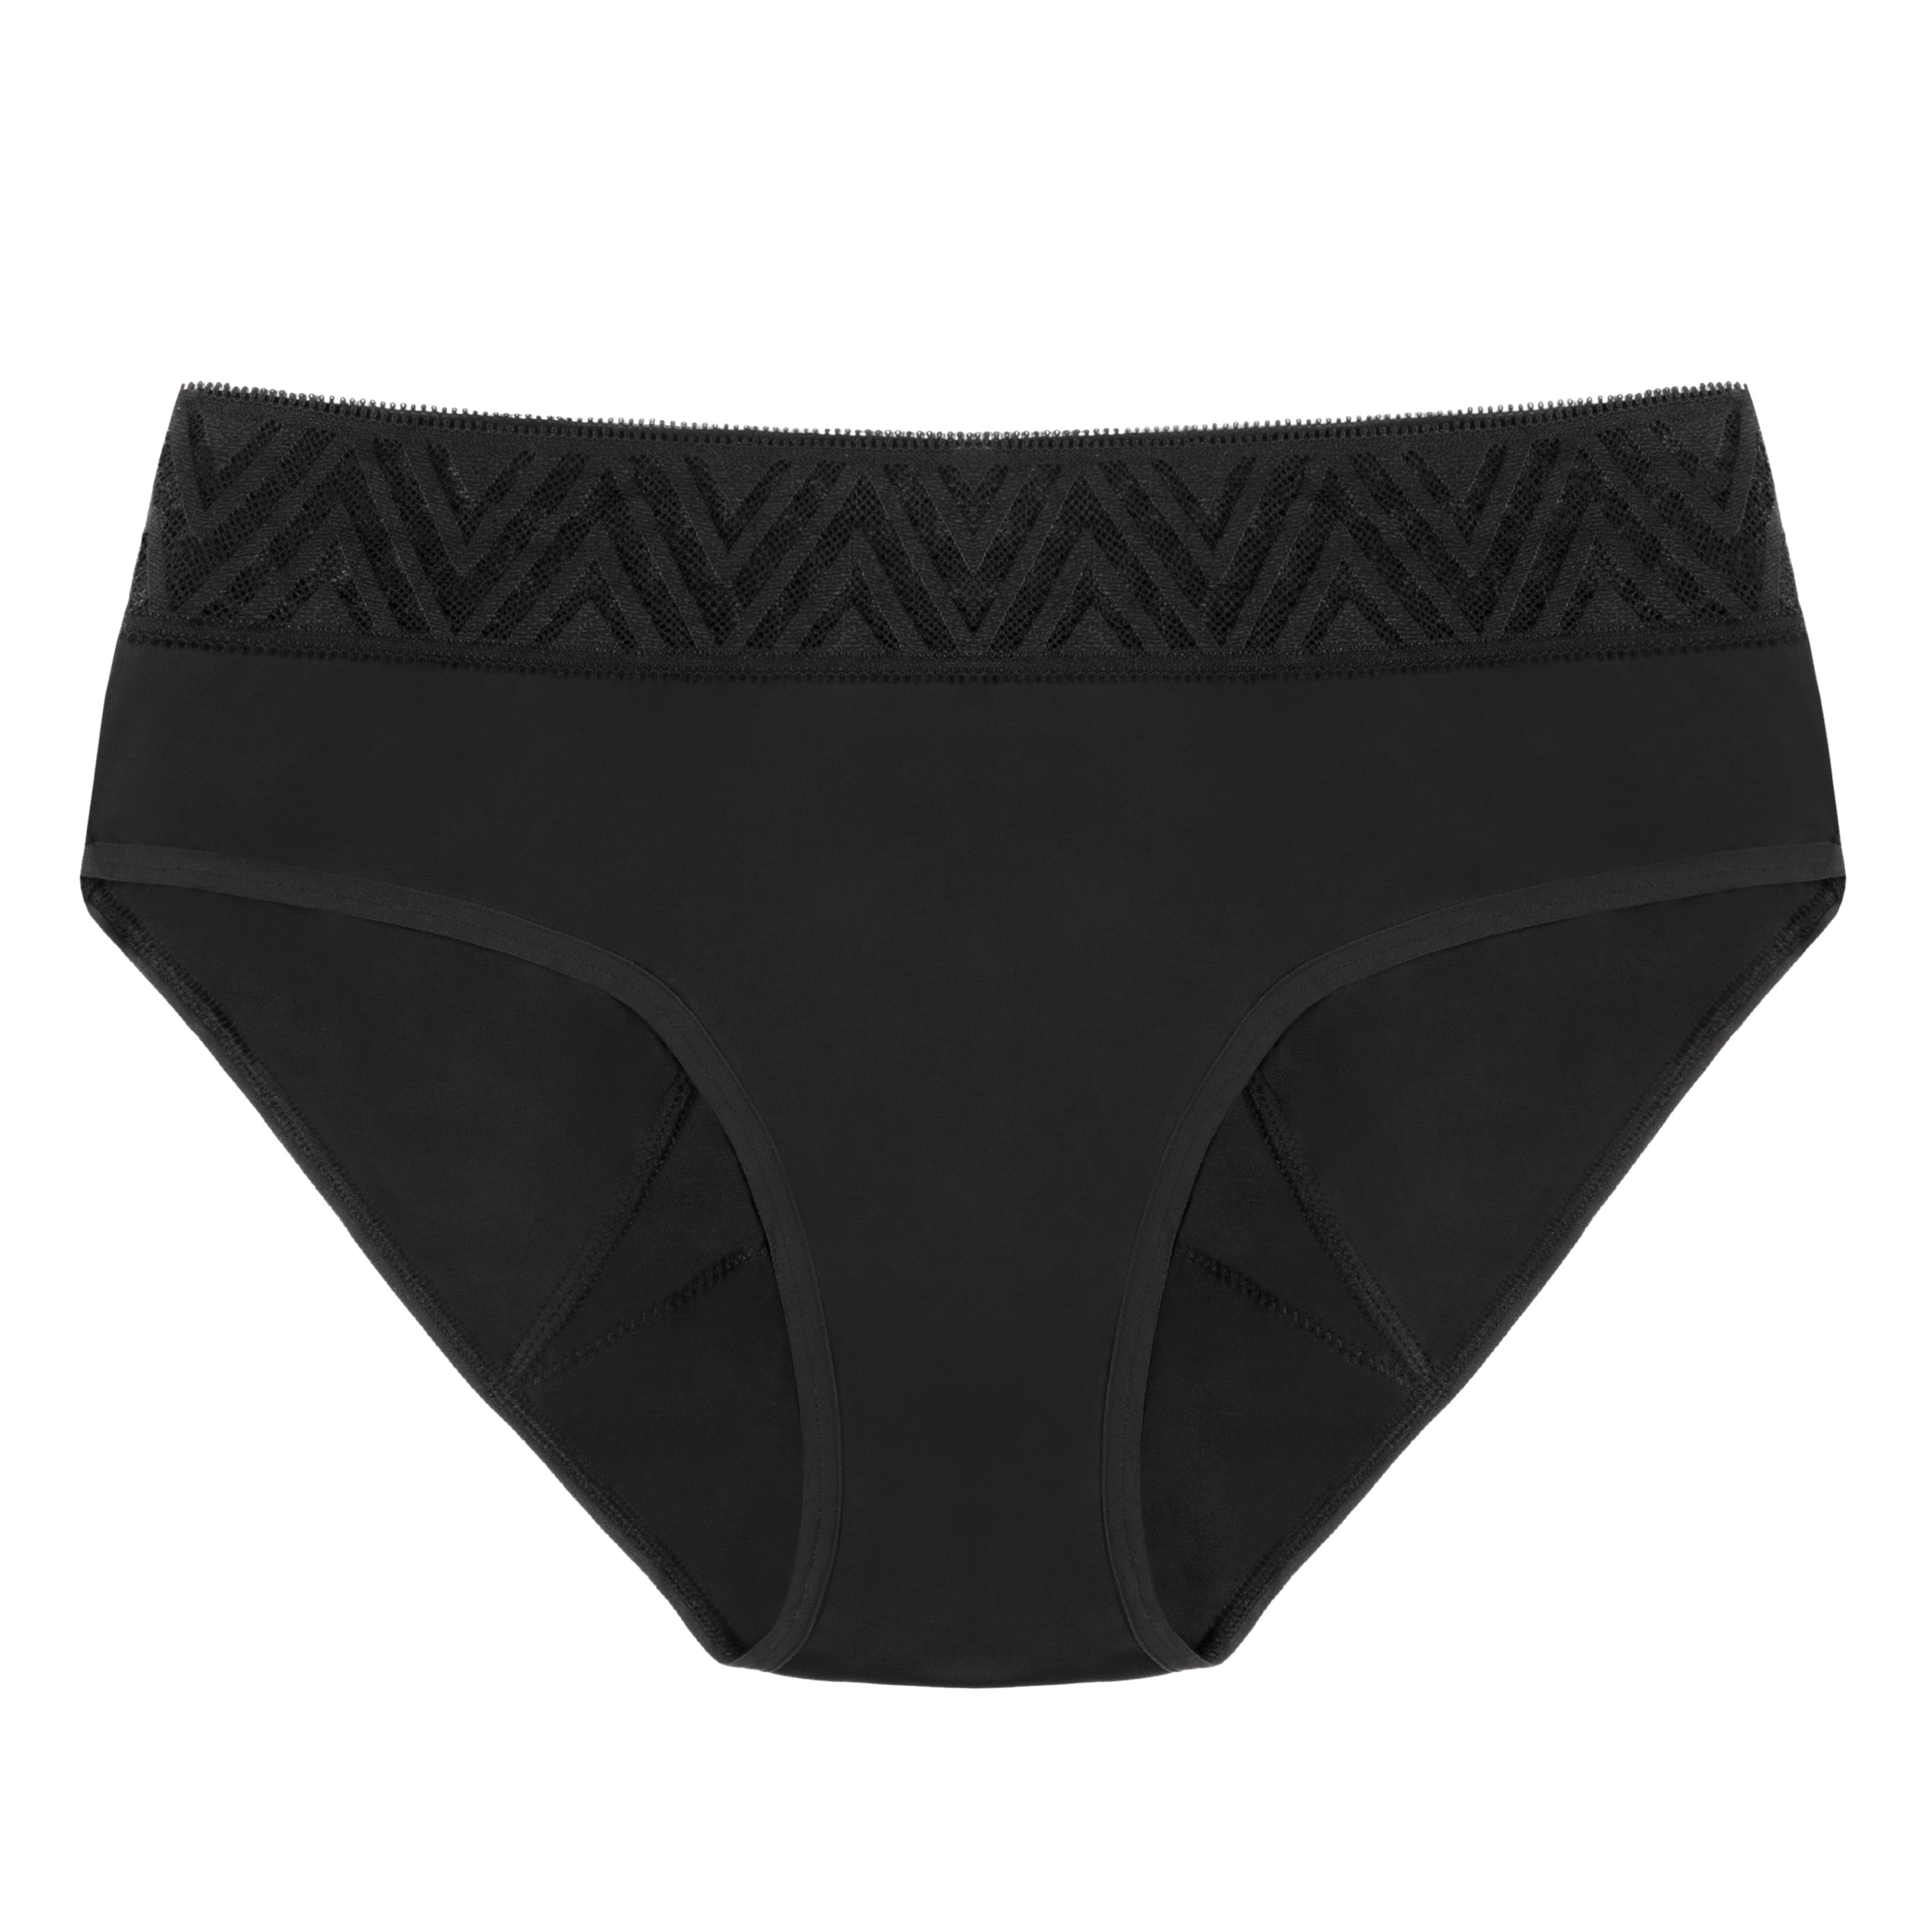 DISCThinx Period Proof Hiphugger Black - M (New Geo Lace)